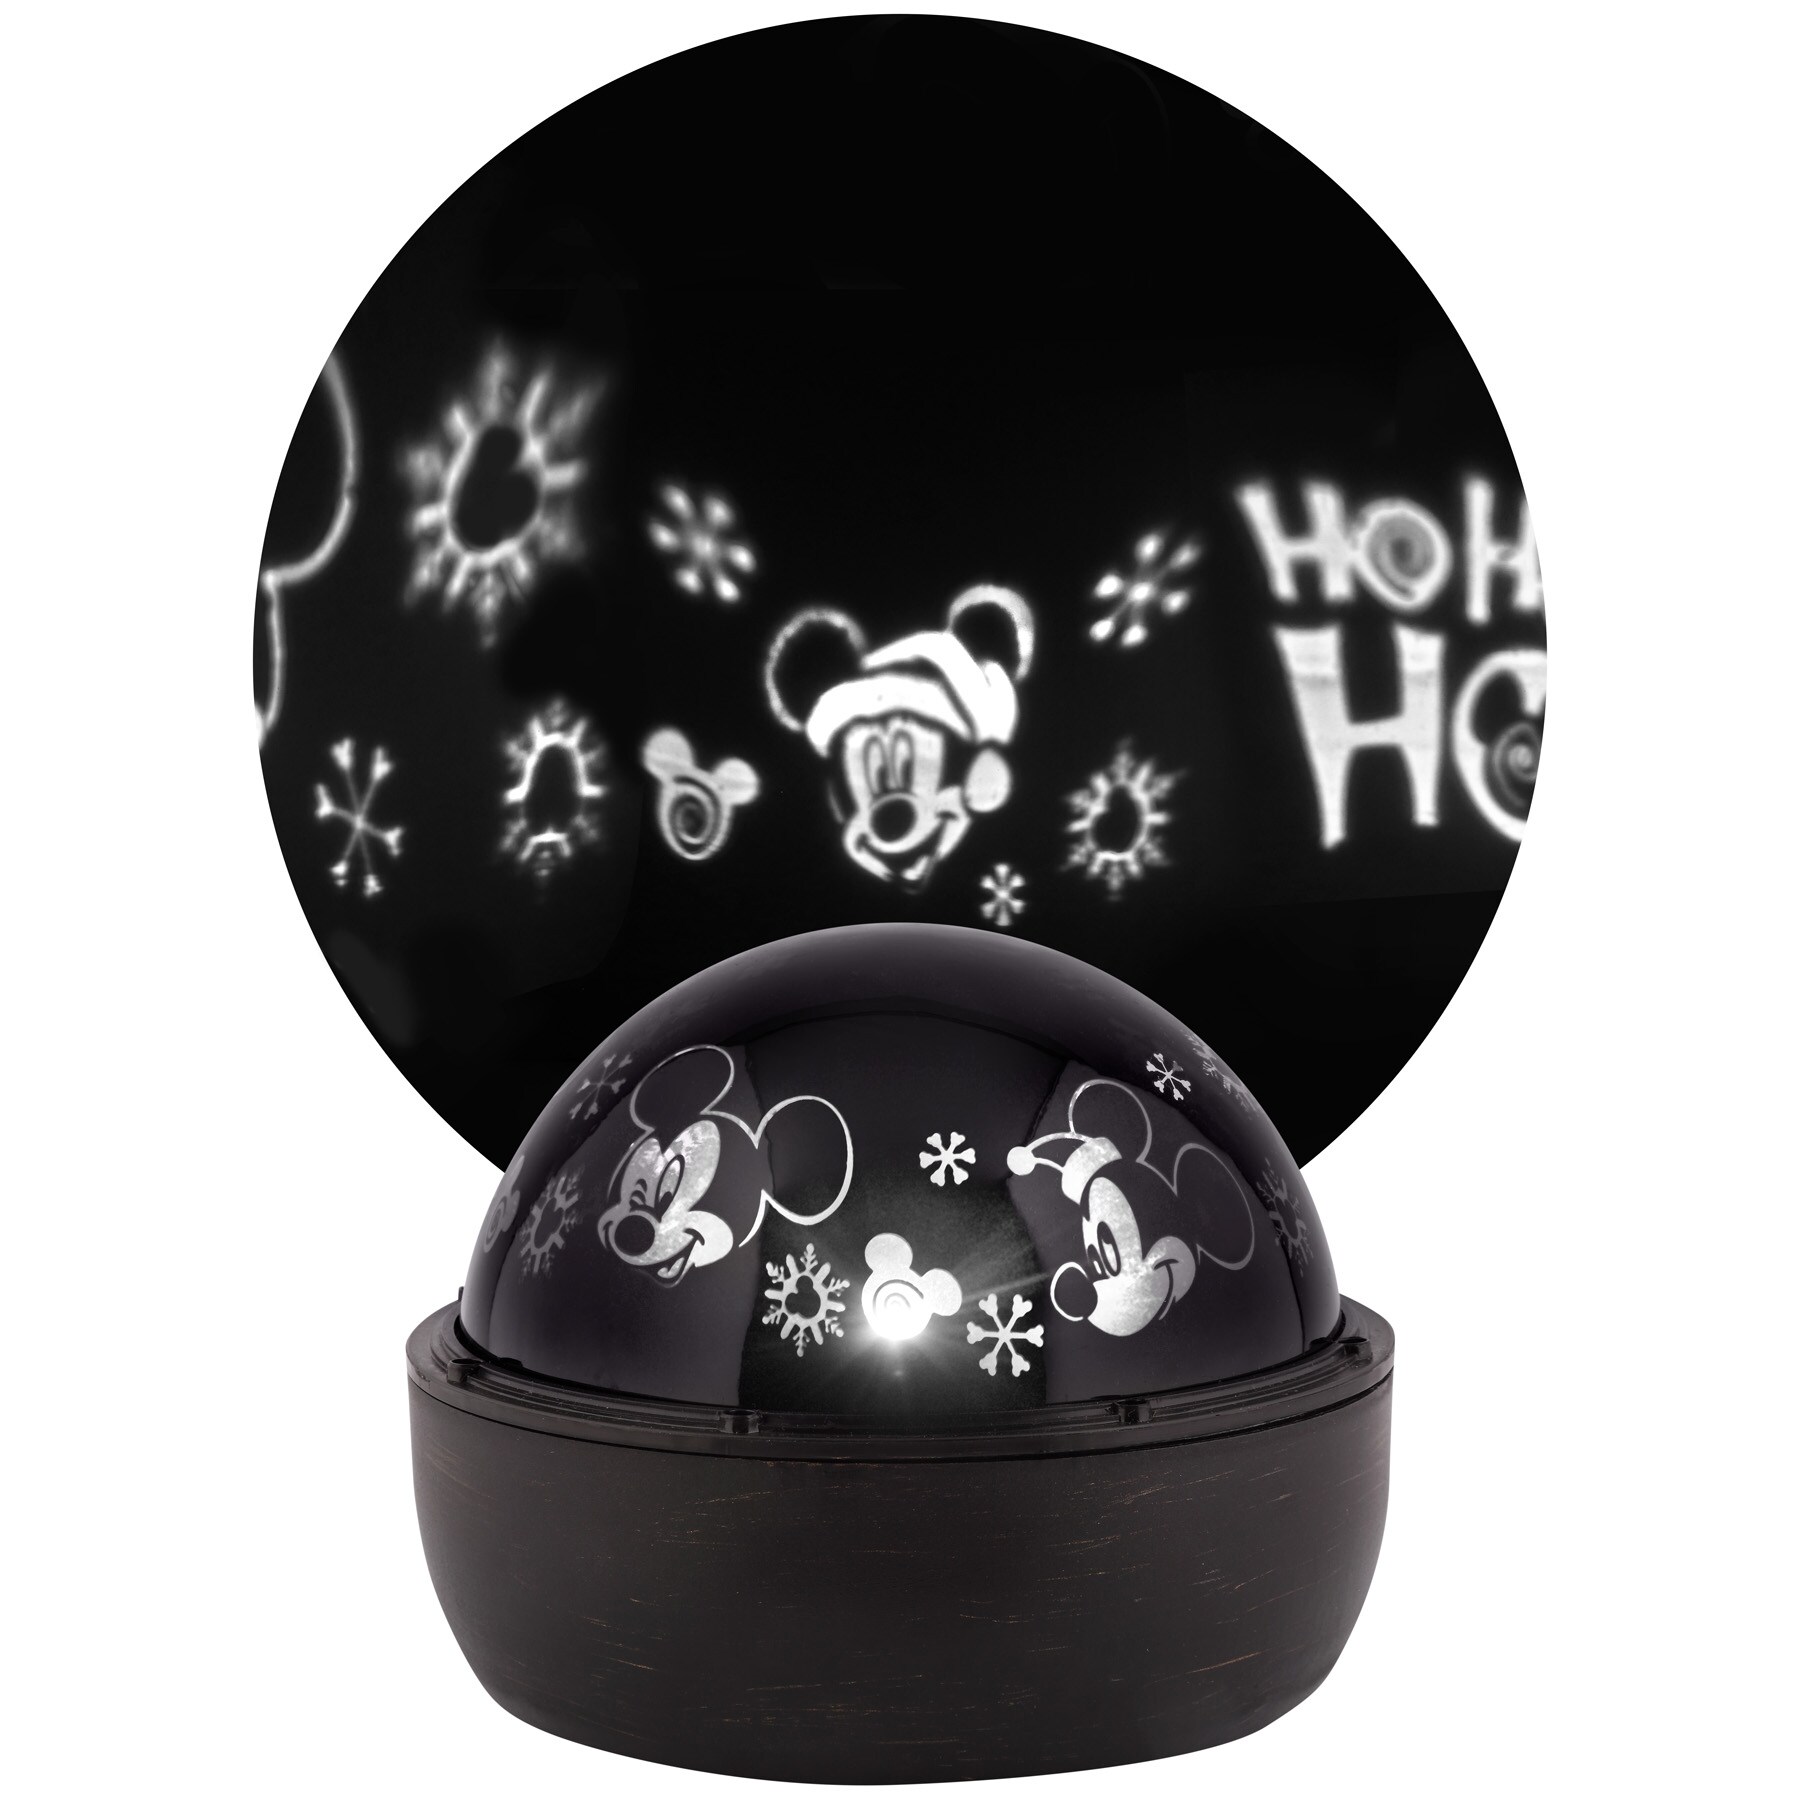 Disney Multi function White LED Multi-design Christmas Indoor Tabletop Projector 